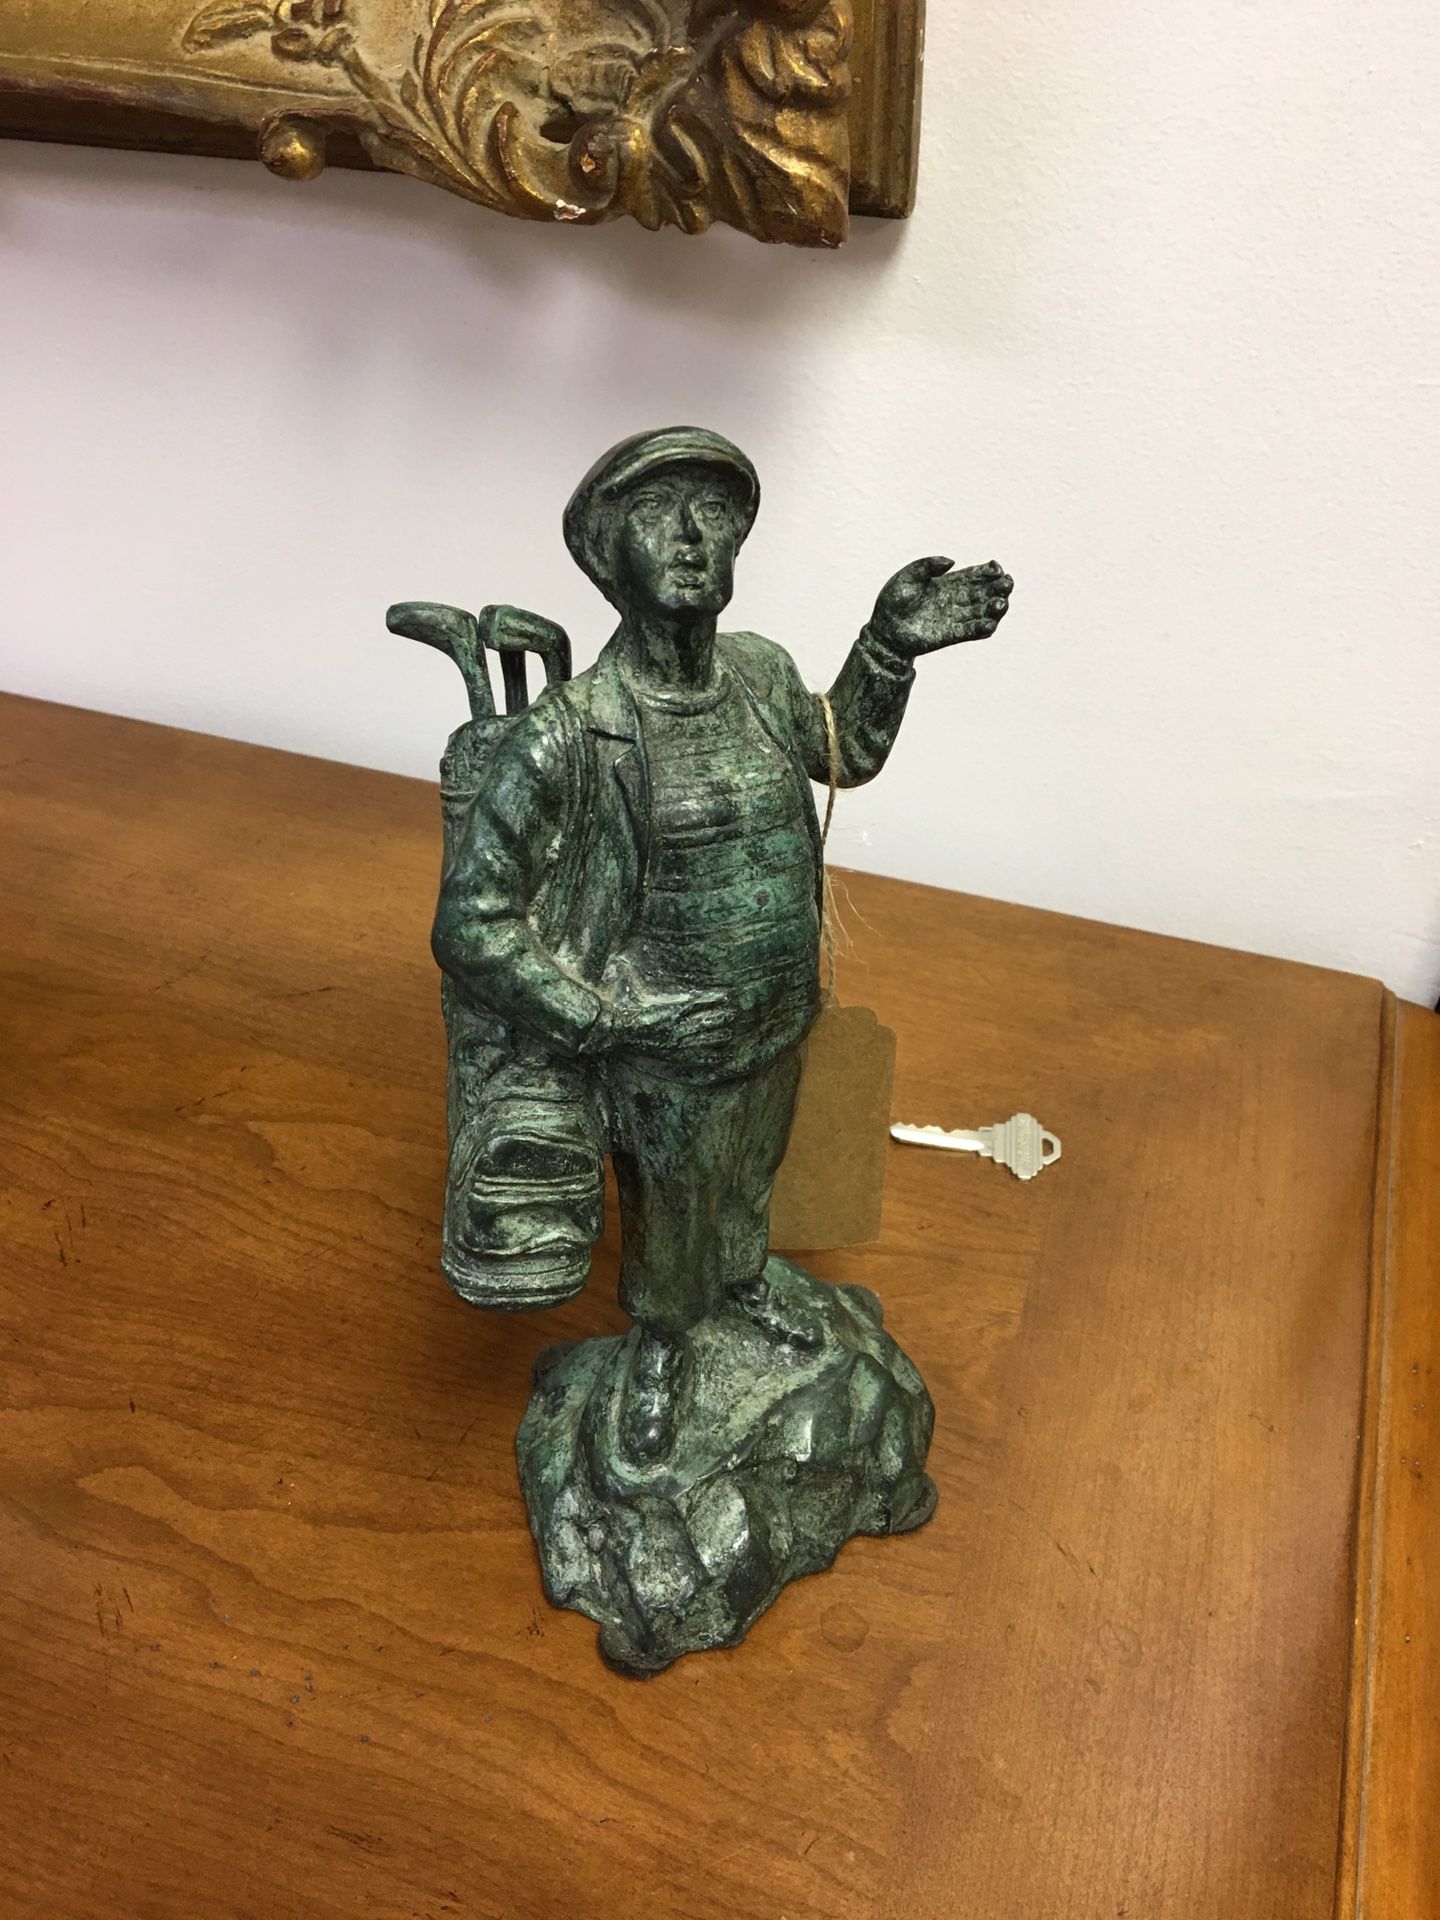 Solid bronze golfer statue, removable clubs, collectible